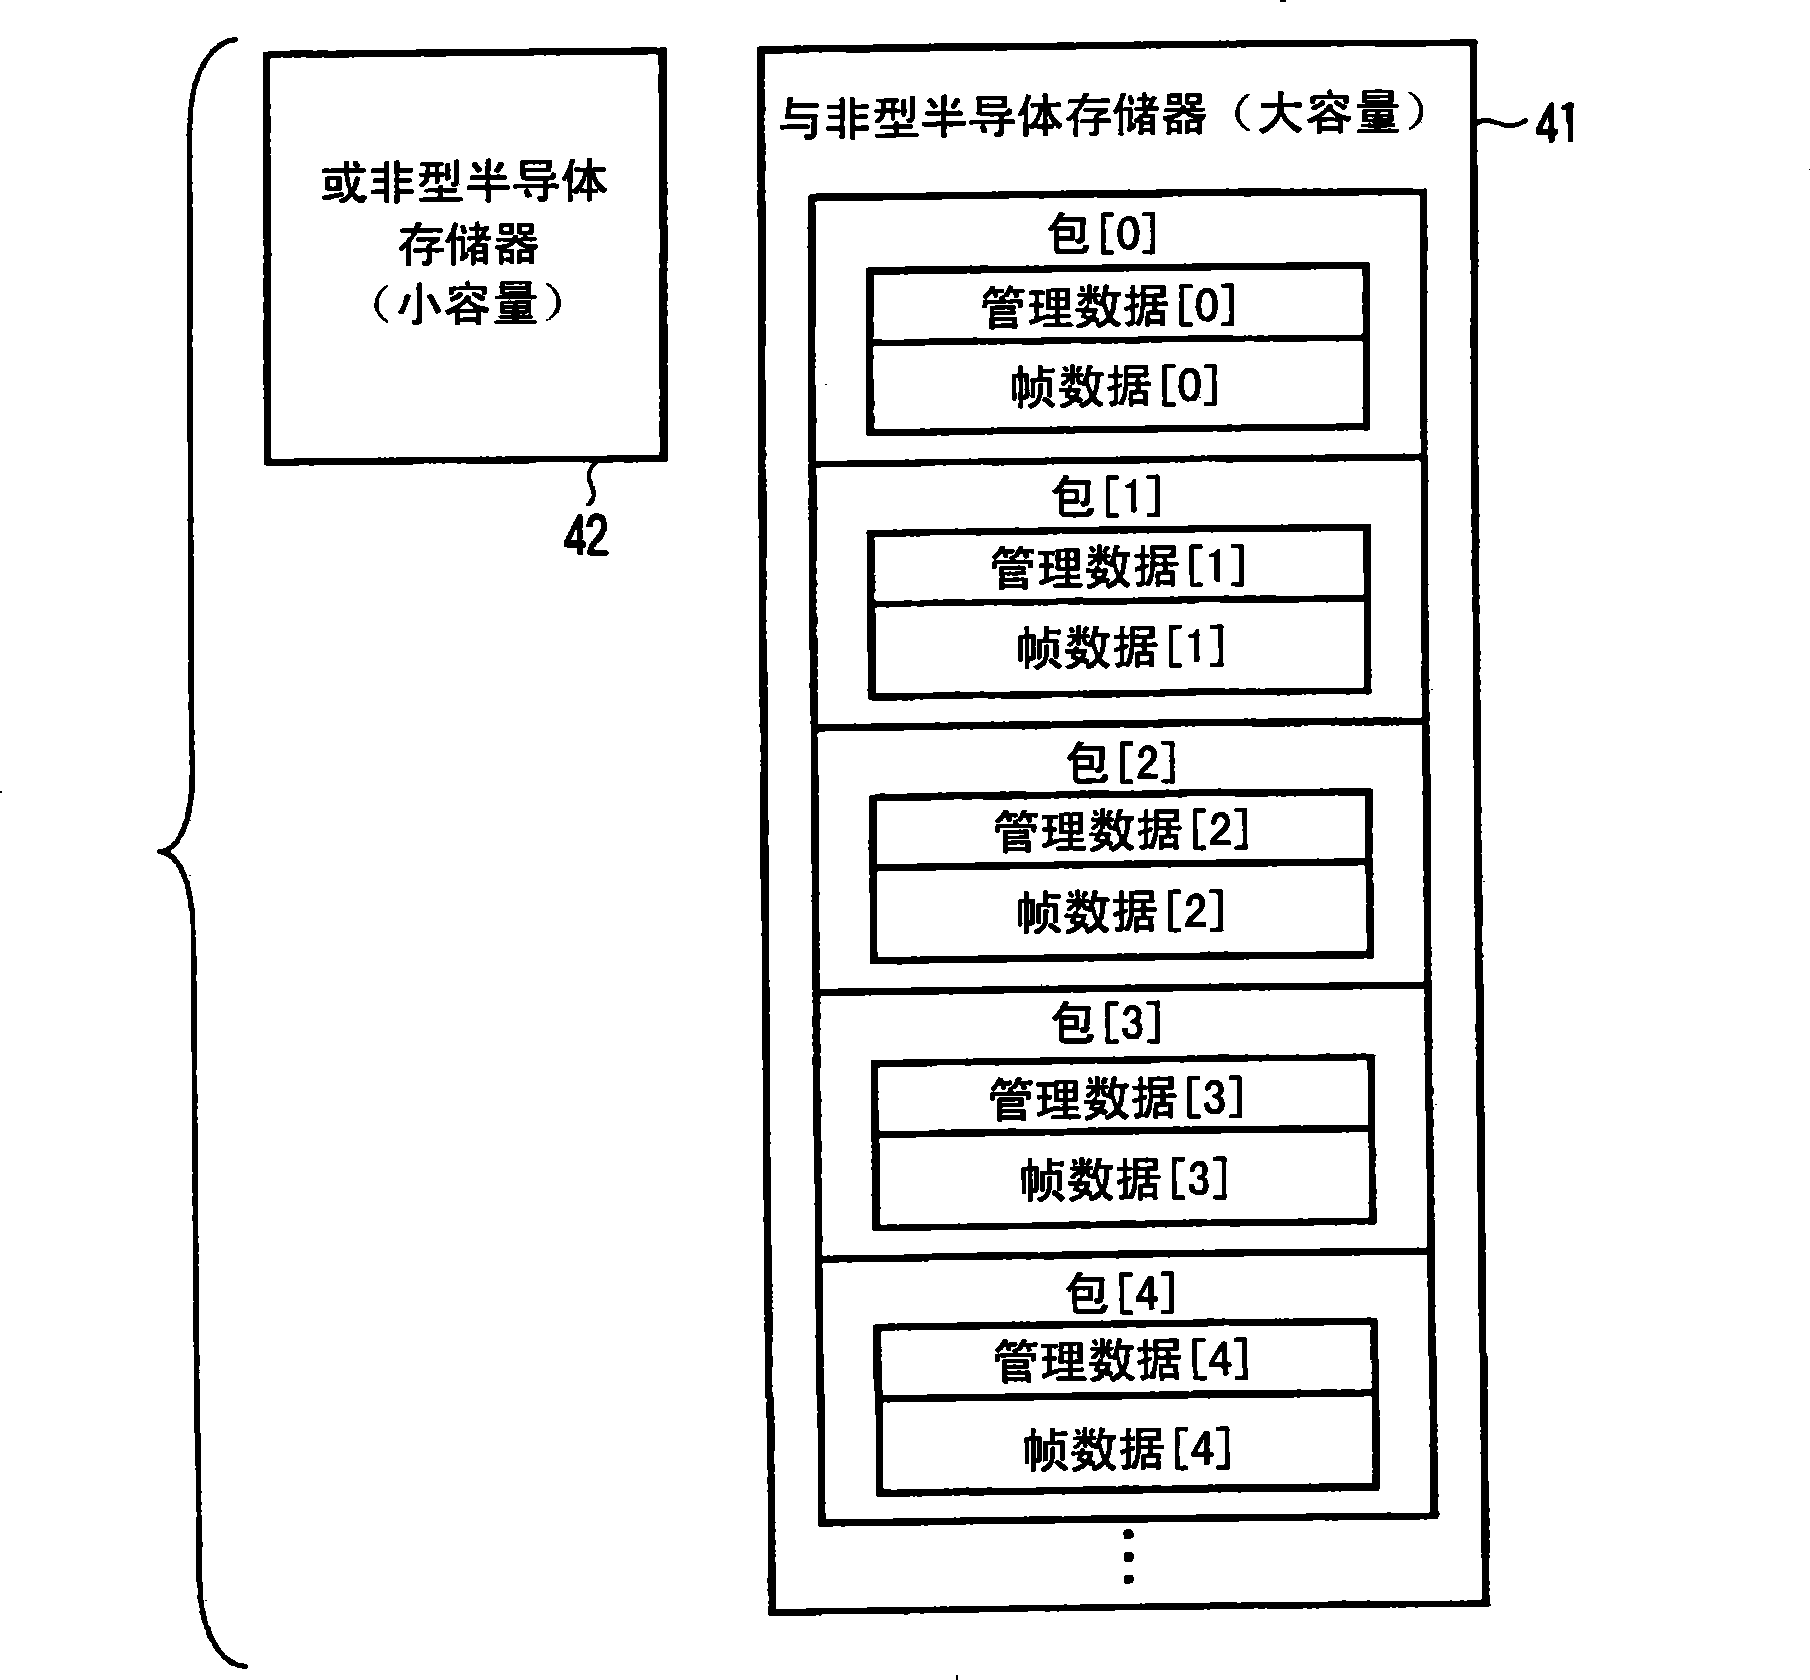 Semiconductor memory storage apparatus and content data management method